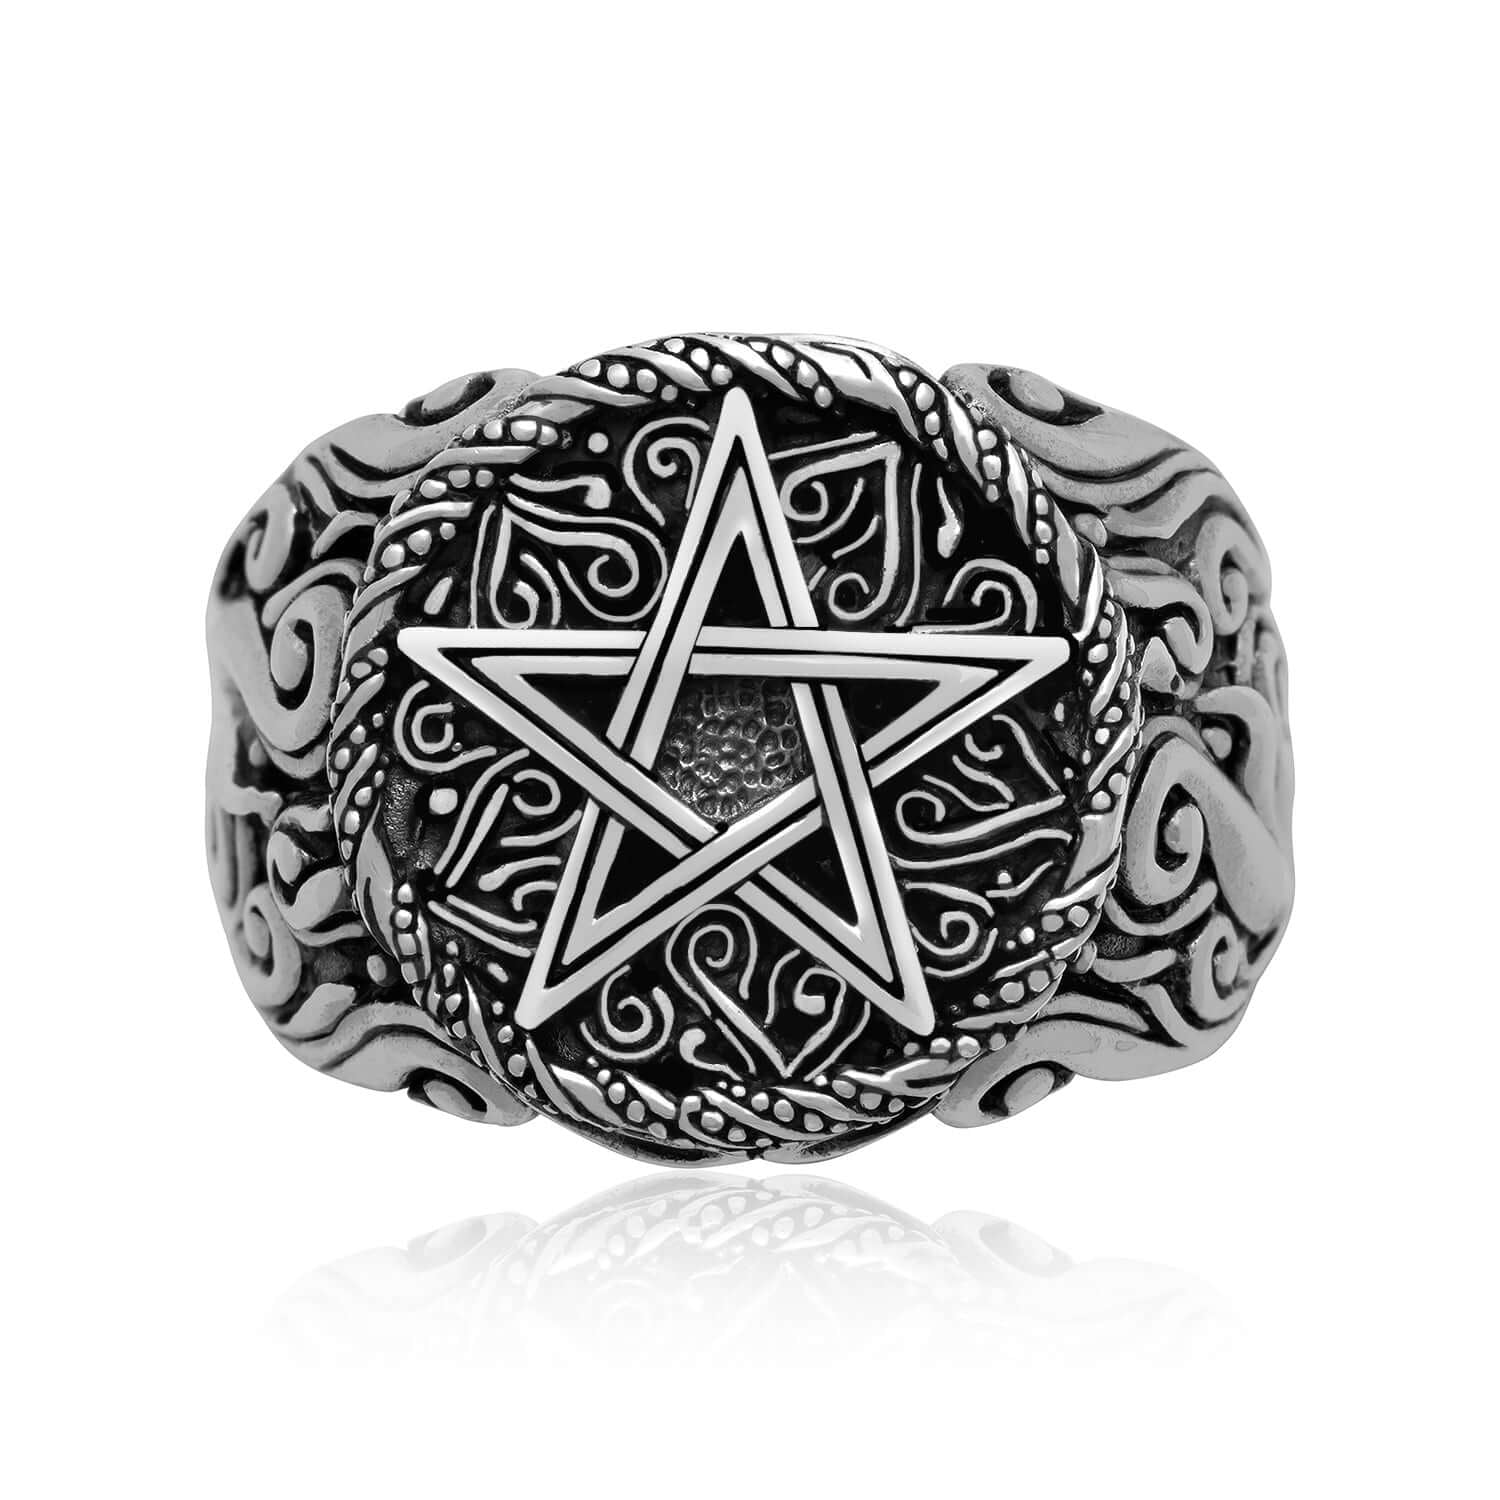 KARMELLING 20PC Antique Silver Alloy Hammered Metal Pentagram Star Buttons  2 Holes 21mm x20mm(7/8 x 6/8)